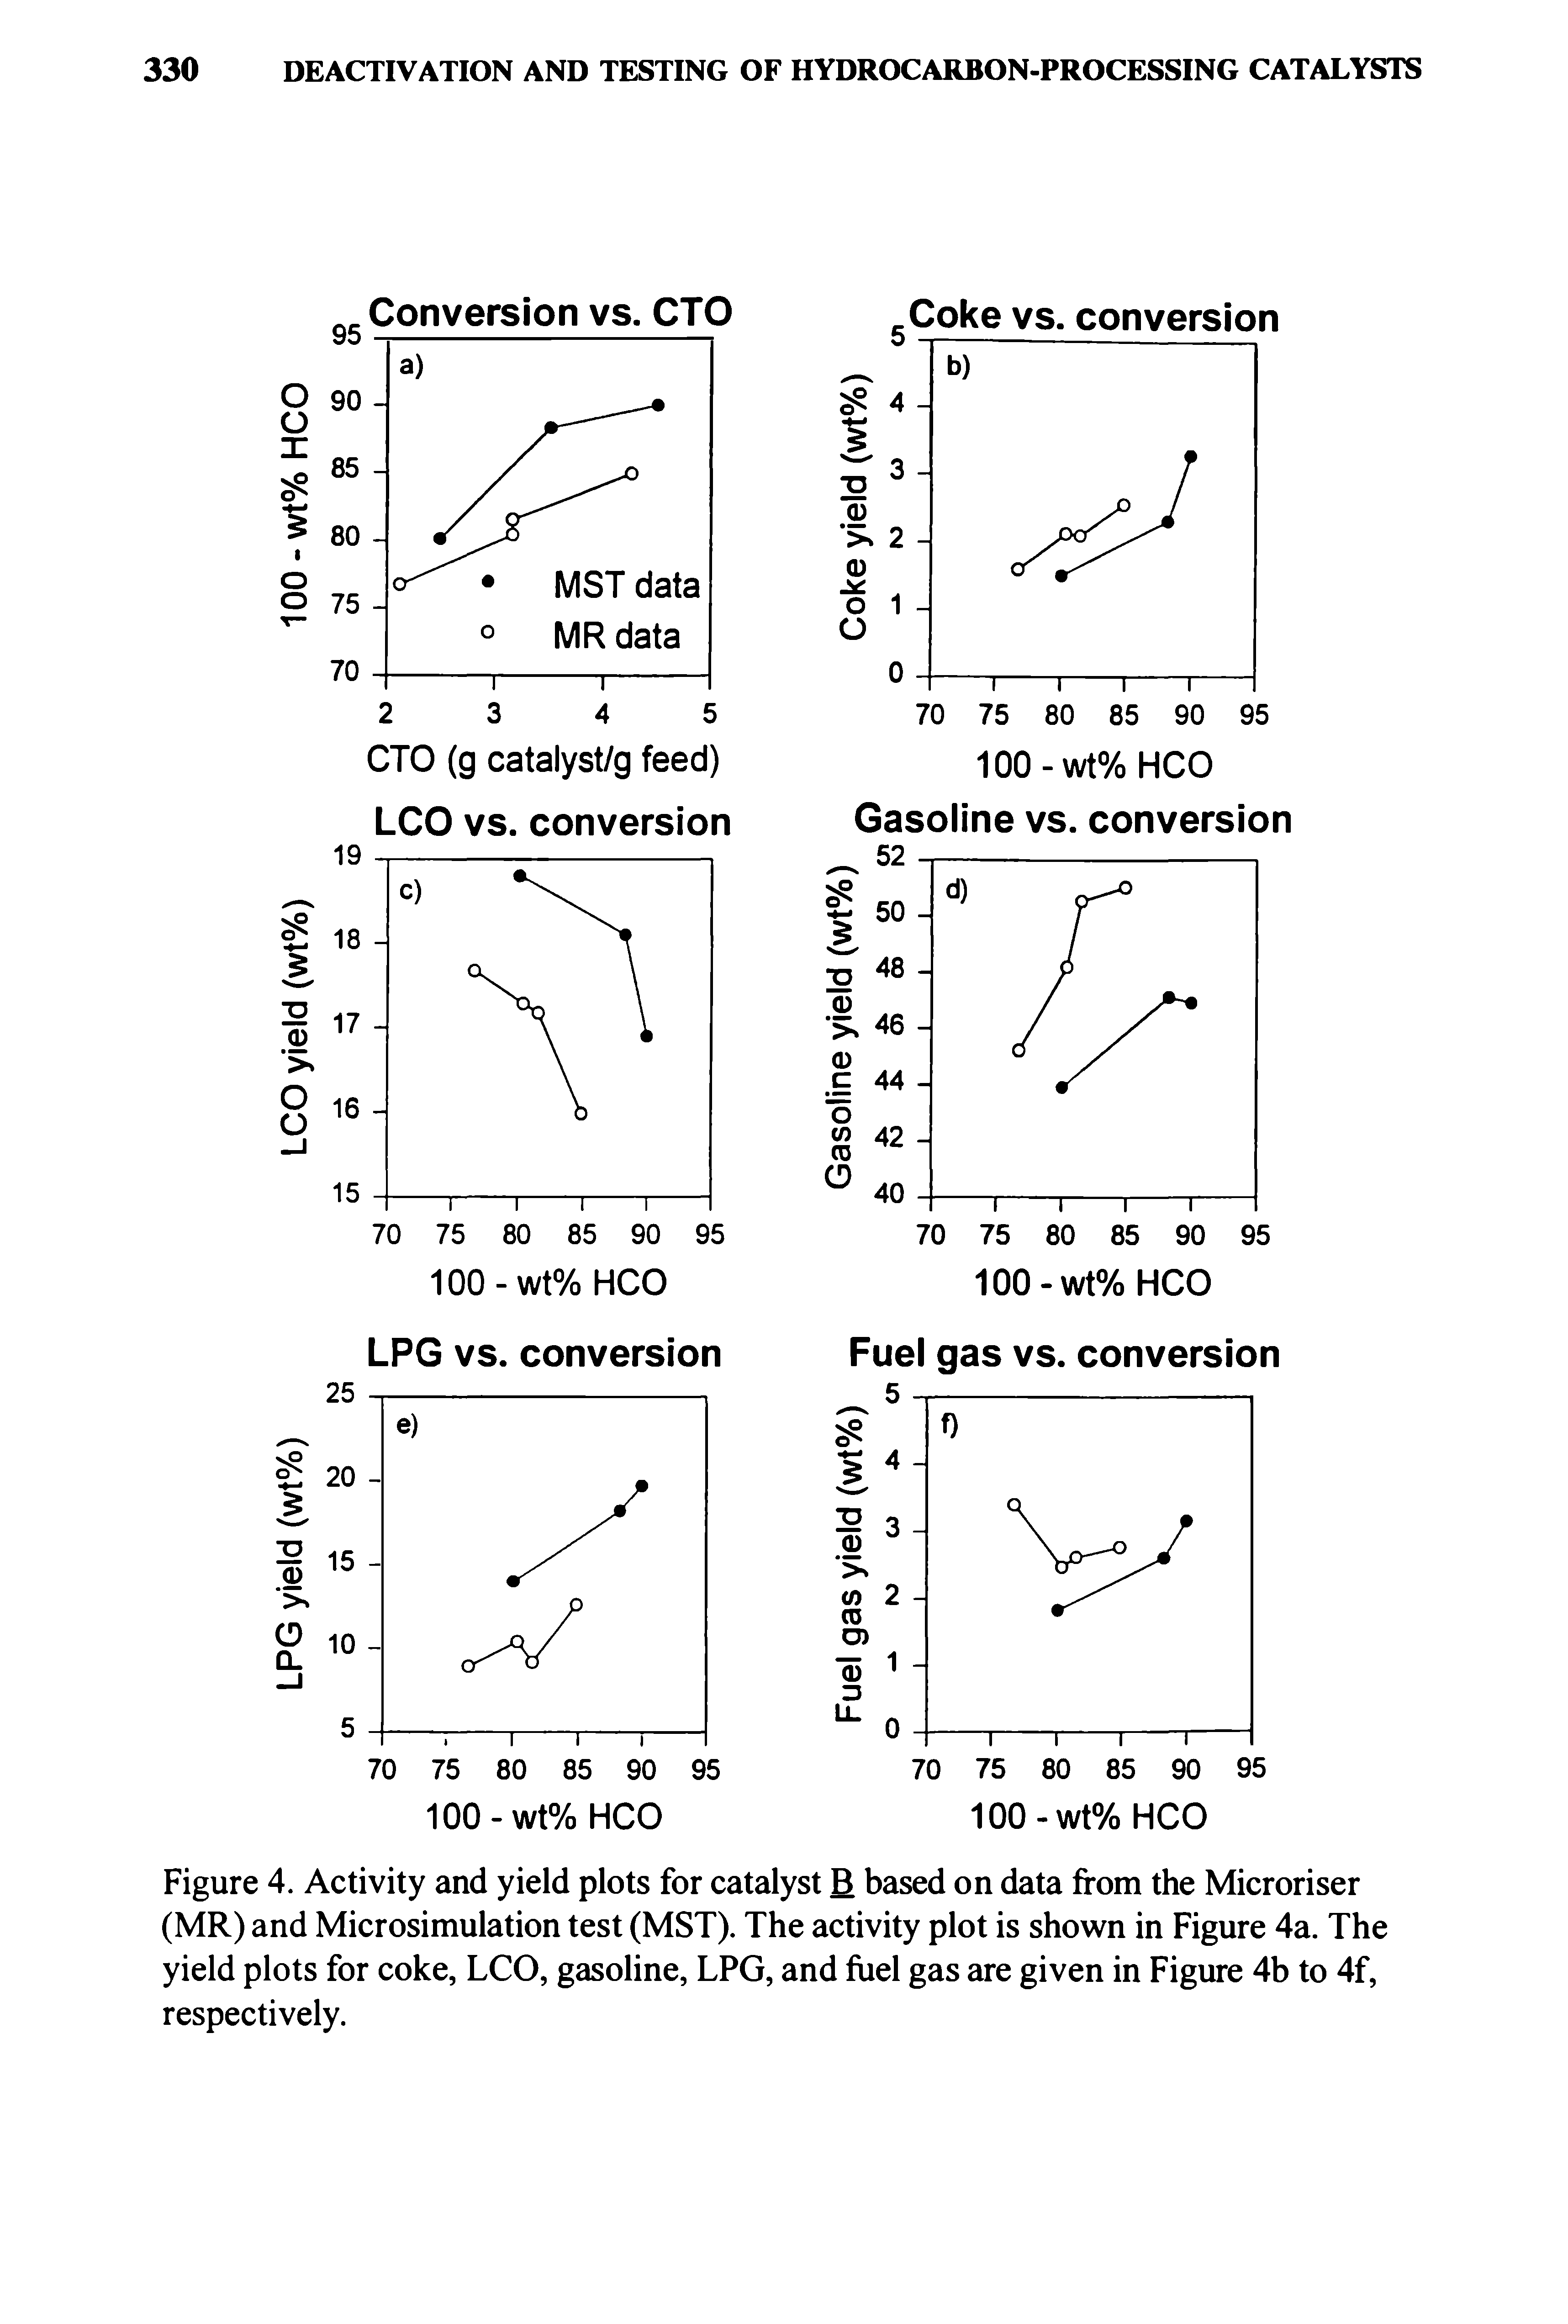 Figure 4. Activity and yield plots for catalyst B based on data from the Microriser (MR) and Microsimulation test (MST). The activity plot is shown in Figure 4a. The yield plots for coke, LCO, gasoline, LPG, and fuel gas are given in Figure 4b to 4f, respectively.